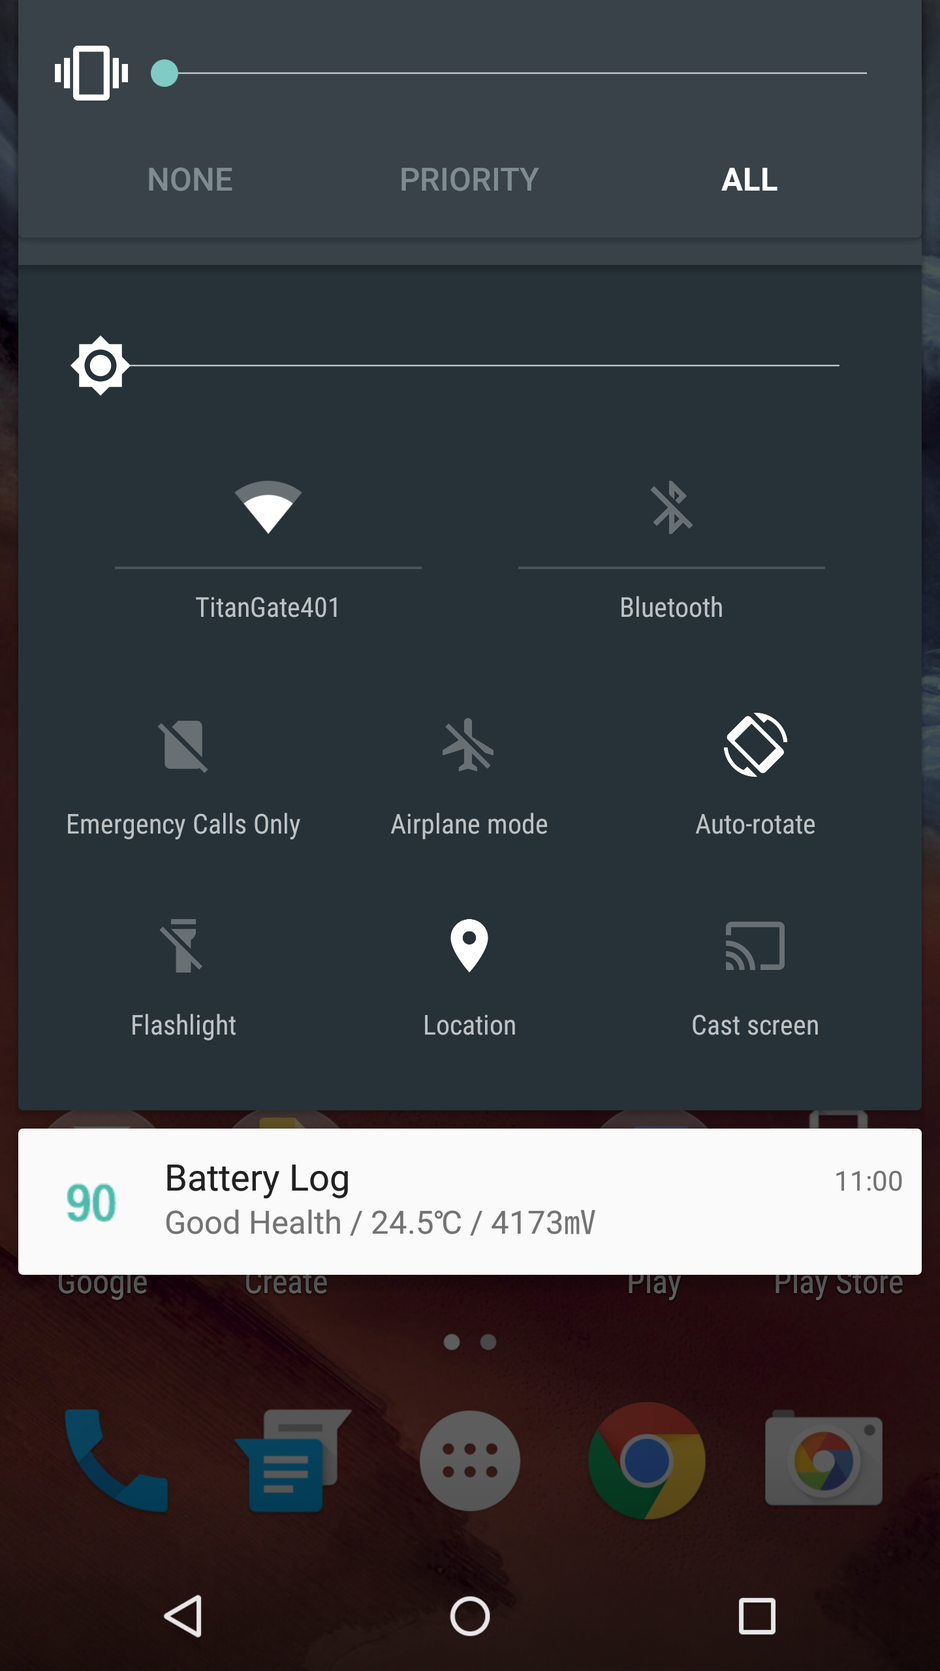 Vibrate is the lowest setting on the volume slider, there is no silent mode in Android 5.0 Lollipop - Did you know: Google removed silent mode from Android 5.0 Lollipop (and everyone is outraged)